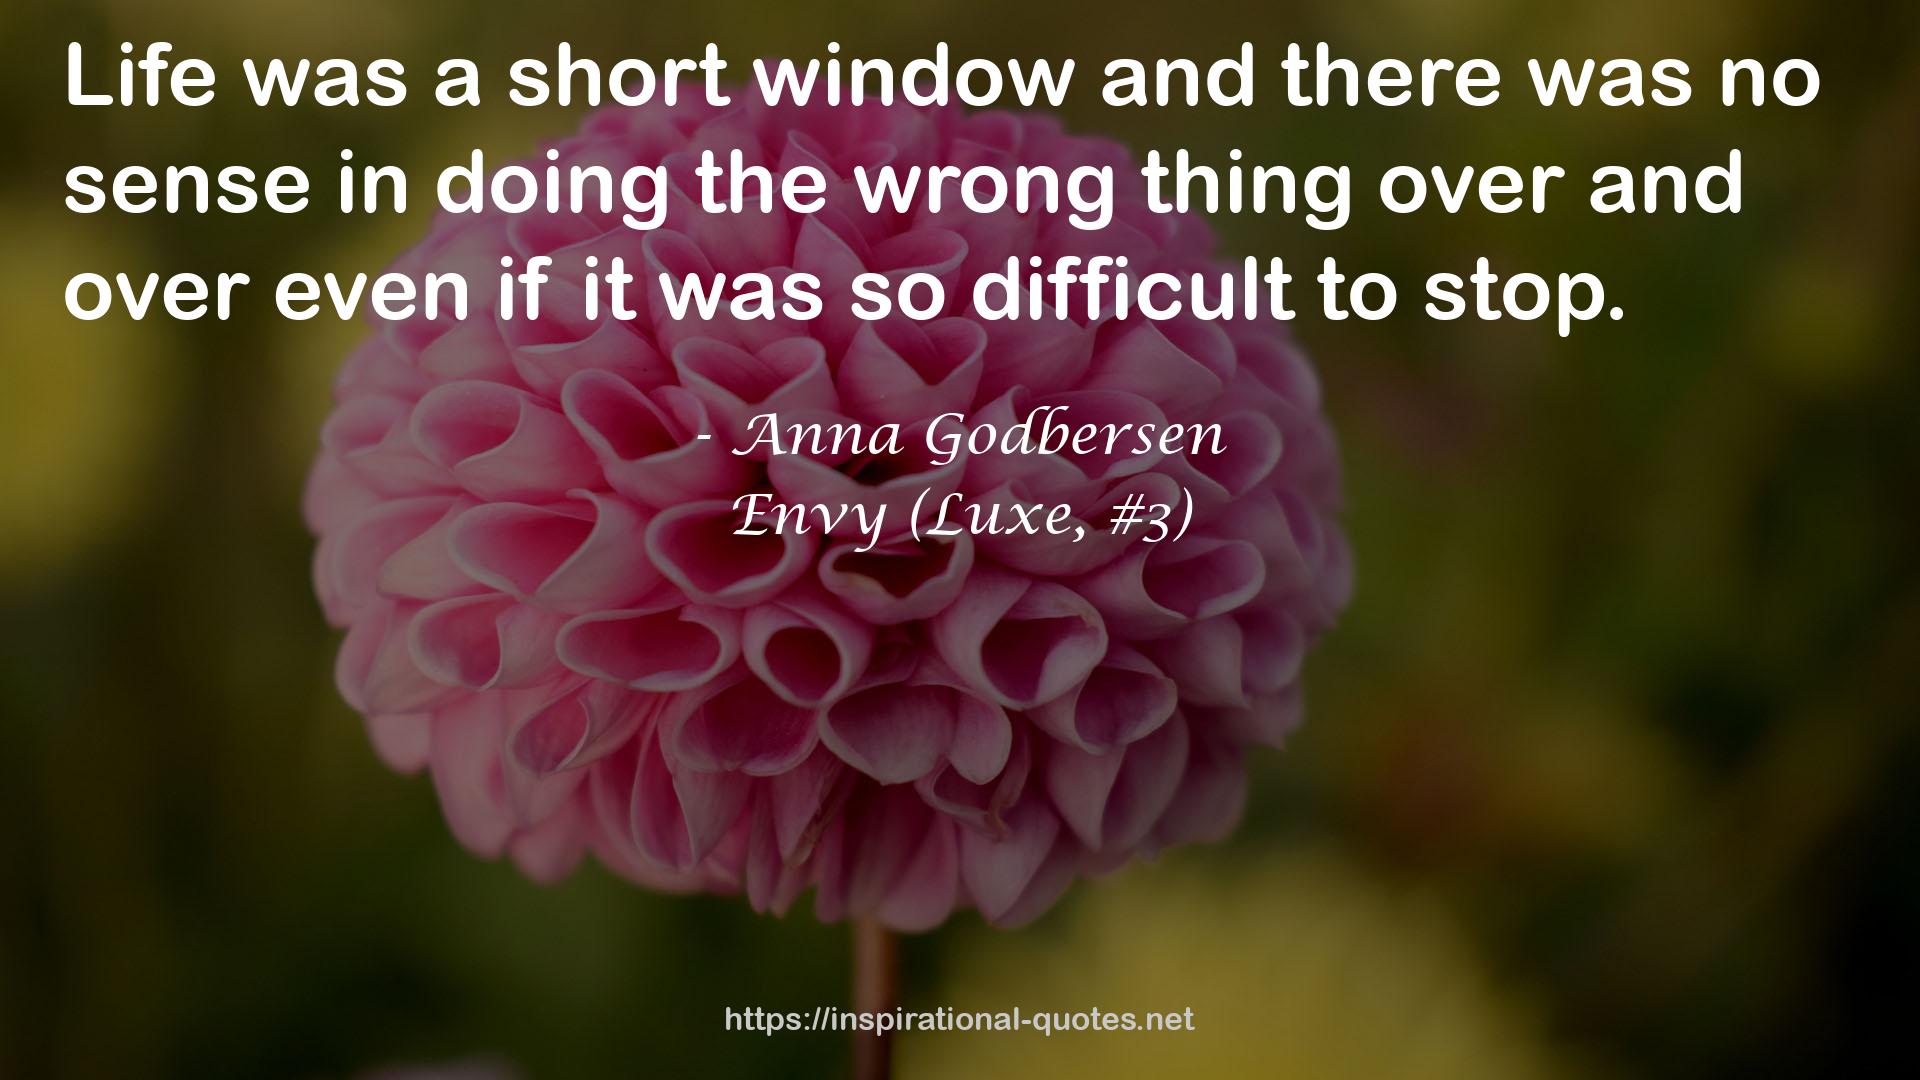 a short window  QUOTES